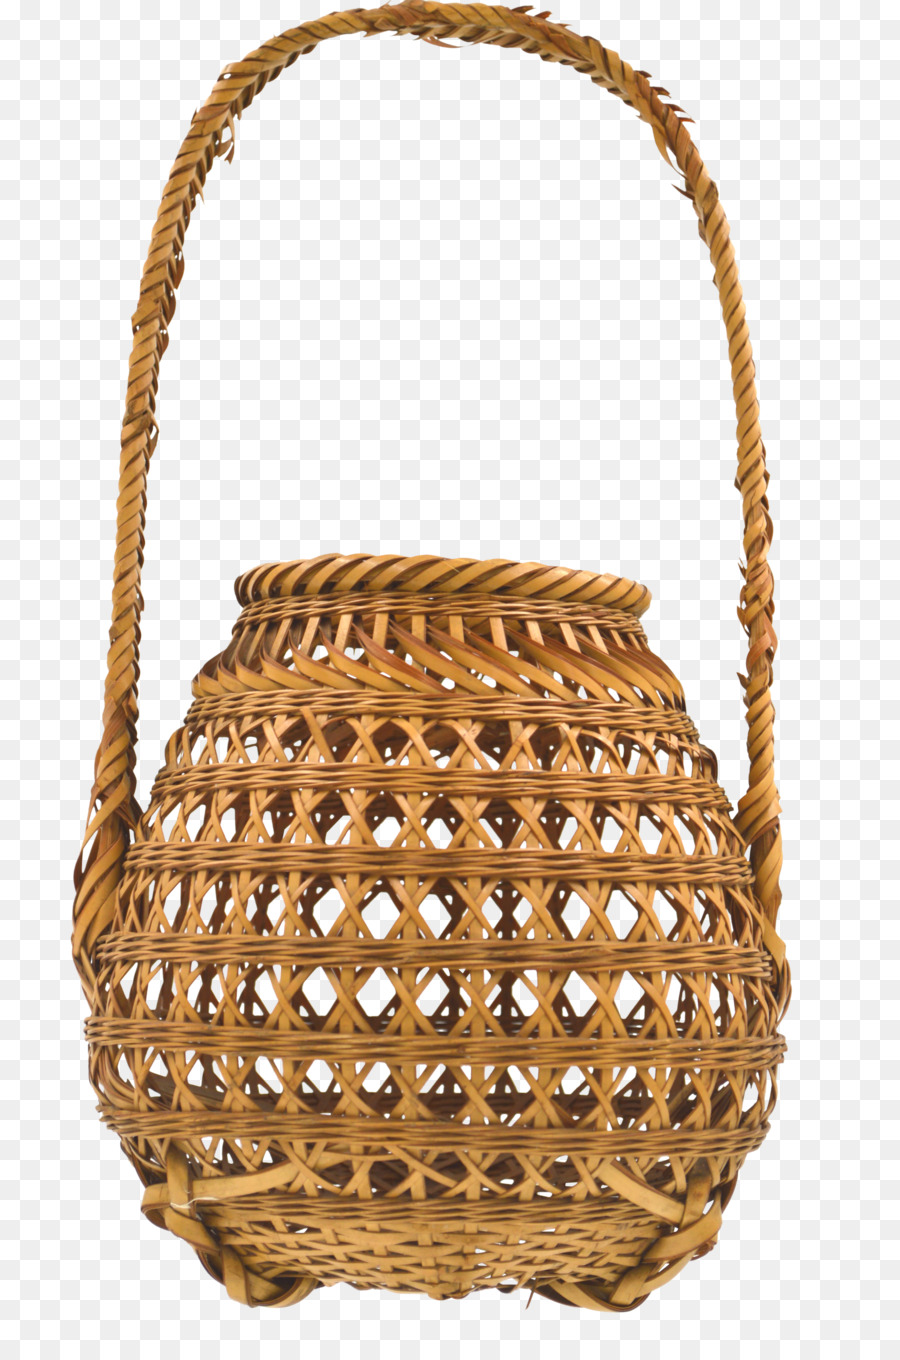 Basket - with two bamboo baskets png download - 4000*6016 - Free Transparent Basket png Download.